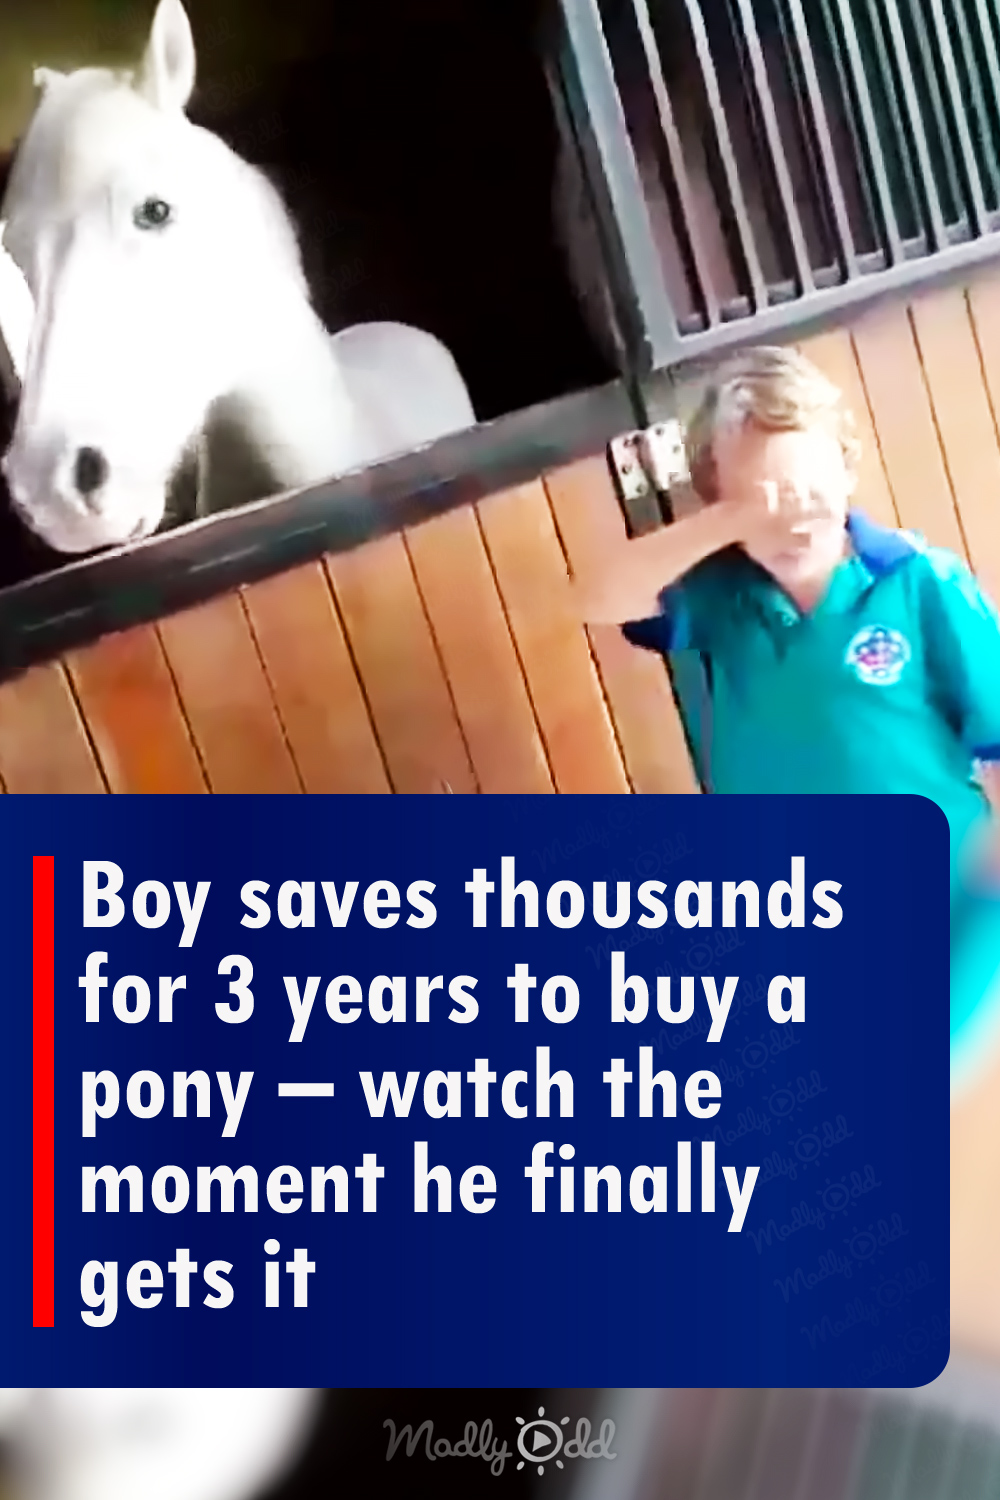 Boy saves thousands for 3 years to buy a pony – watch the moment he finally gets it